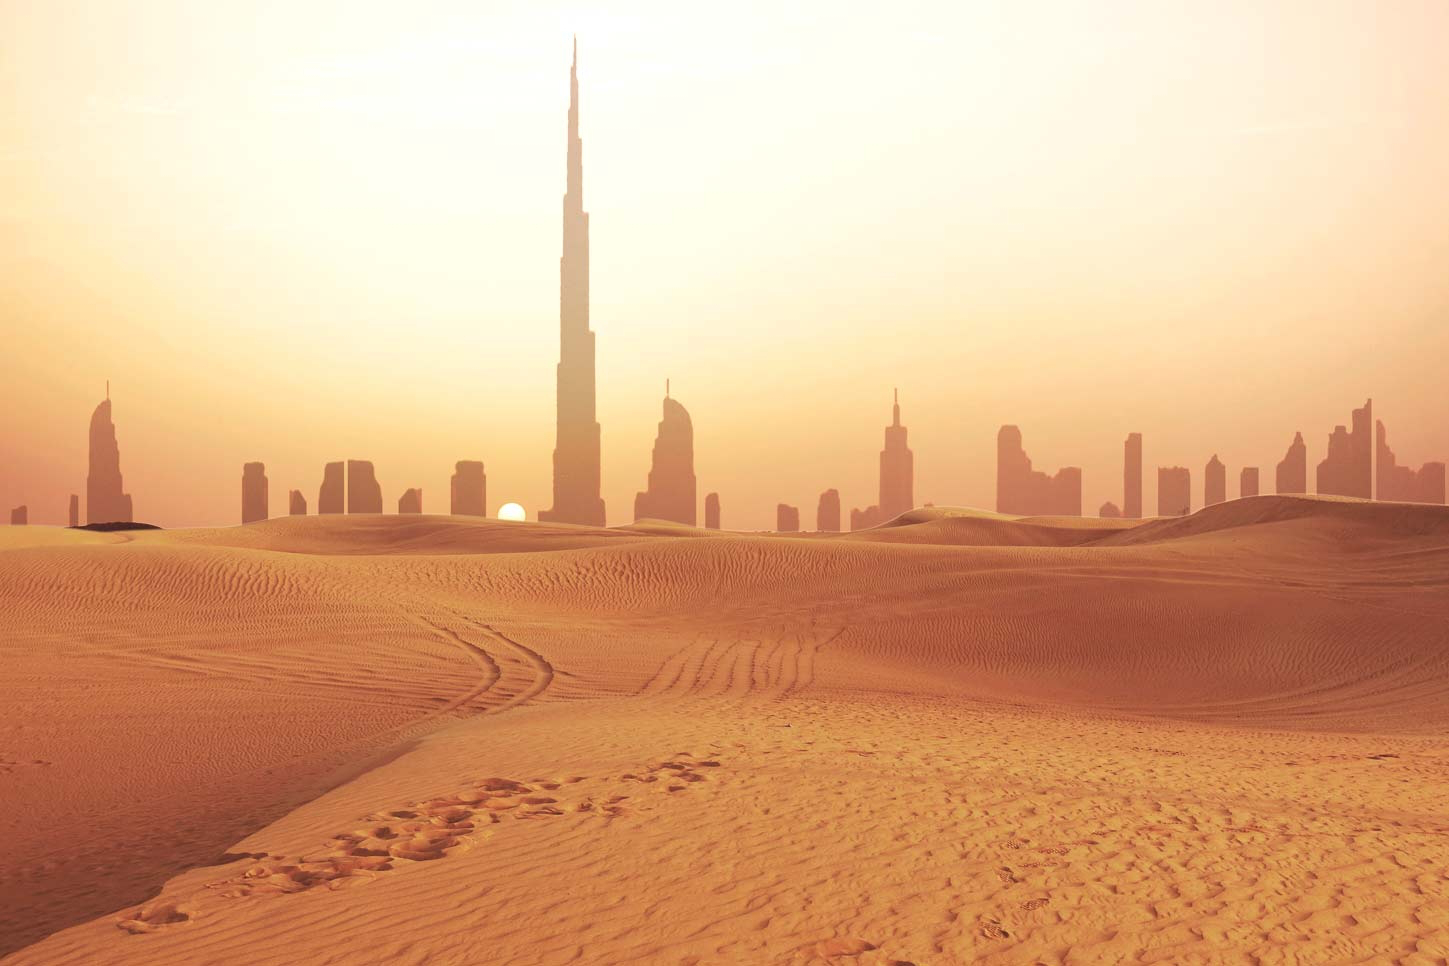 A desert safari in Dubai is a must-do when here on holiday